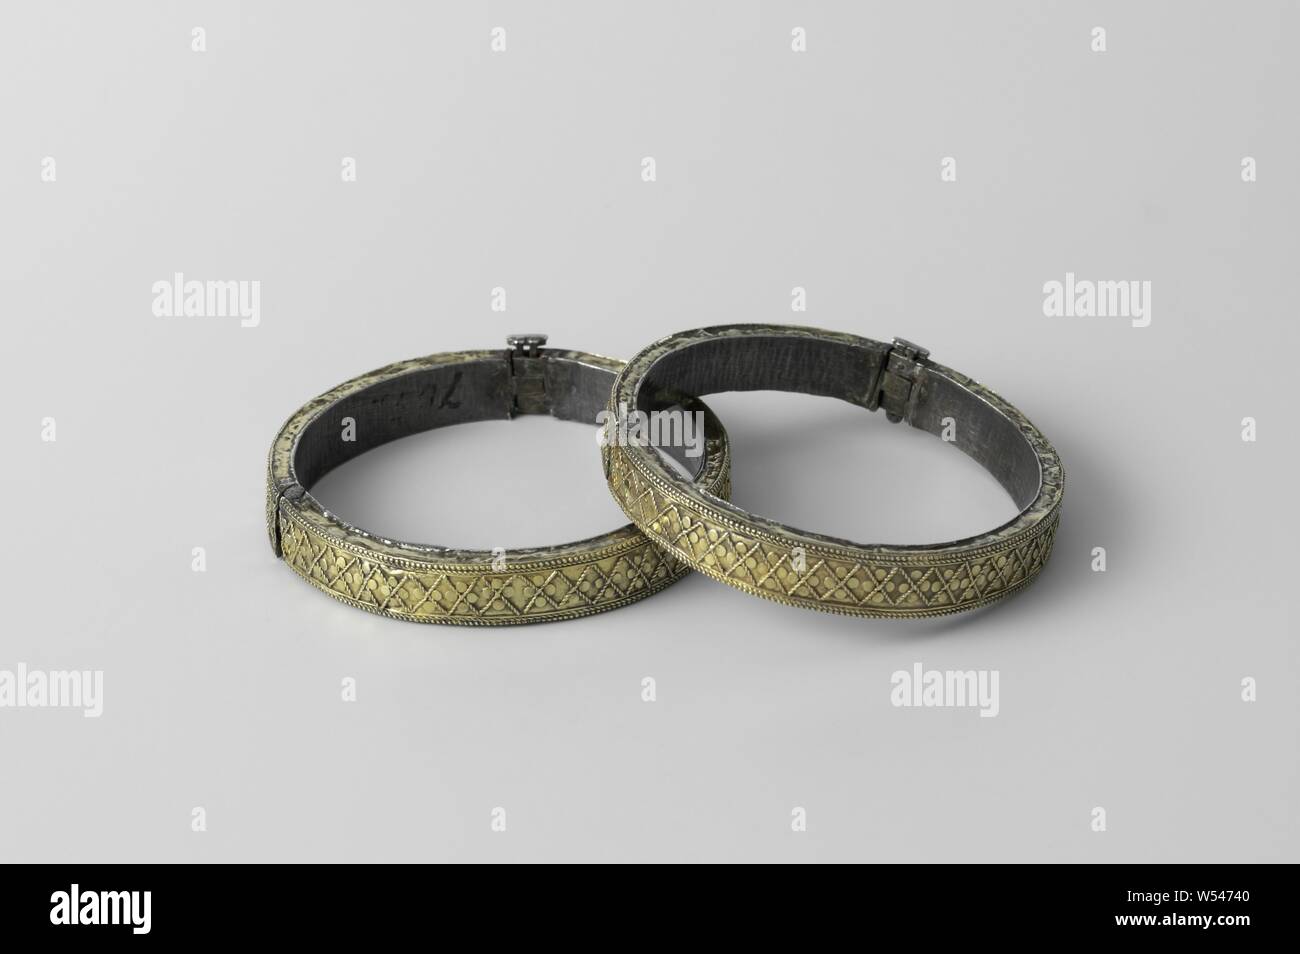 Pair of bracelets (chandan churi), Bracelet with hinge and lock, silver plated with gold. Decorated with diamond motifs, small circles and four pearl borders, anonymous, Surat, c. 1750, gold (metal), silver (metal), striking (metalworking), d 6.5 cm × h 1.5 cm Stock Photo